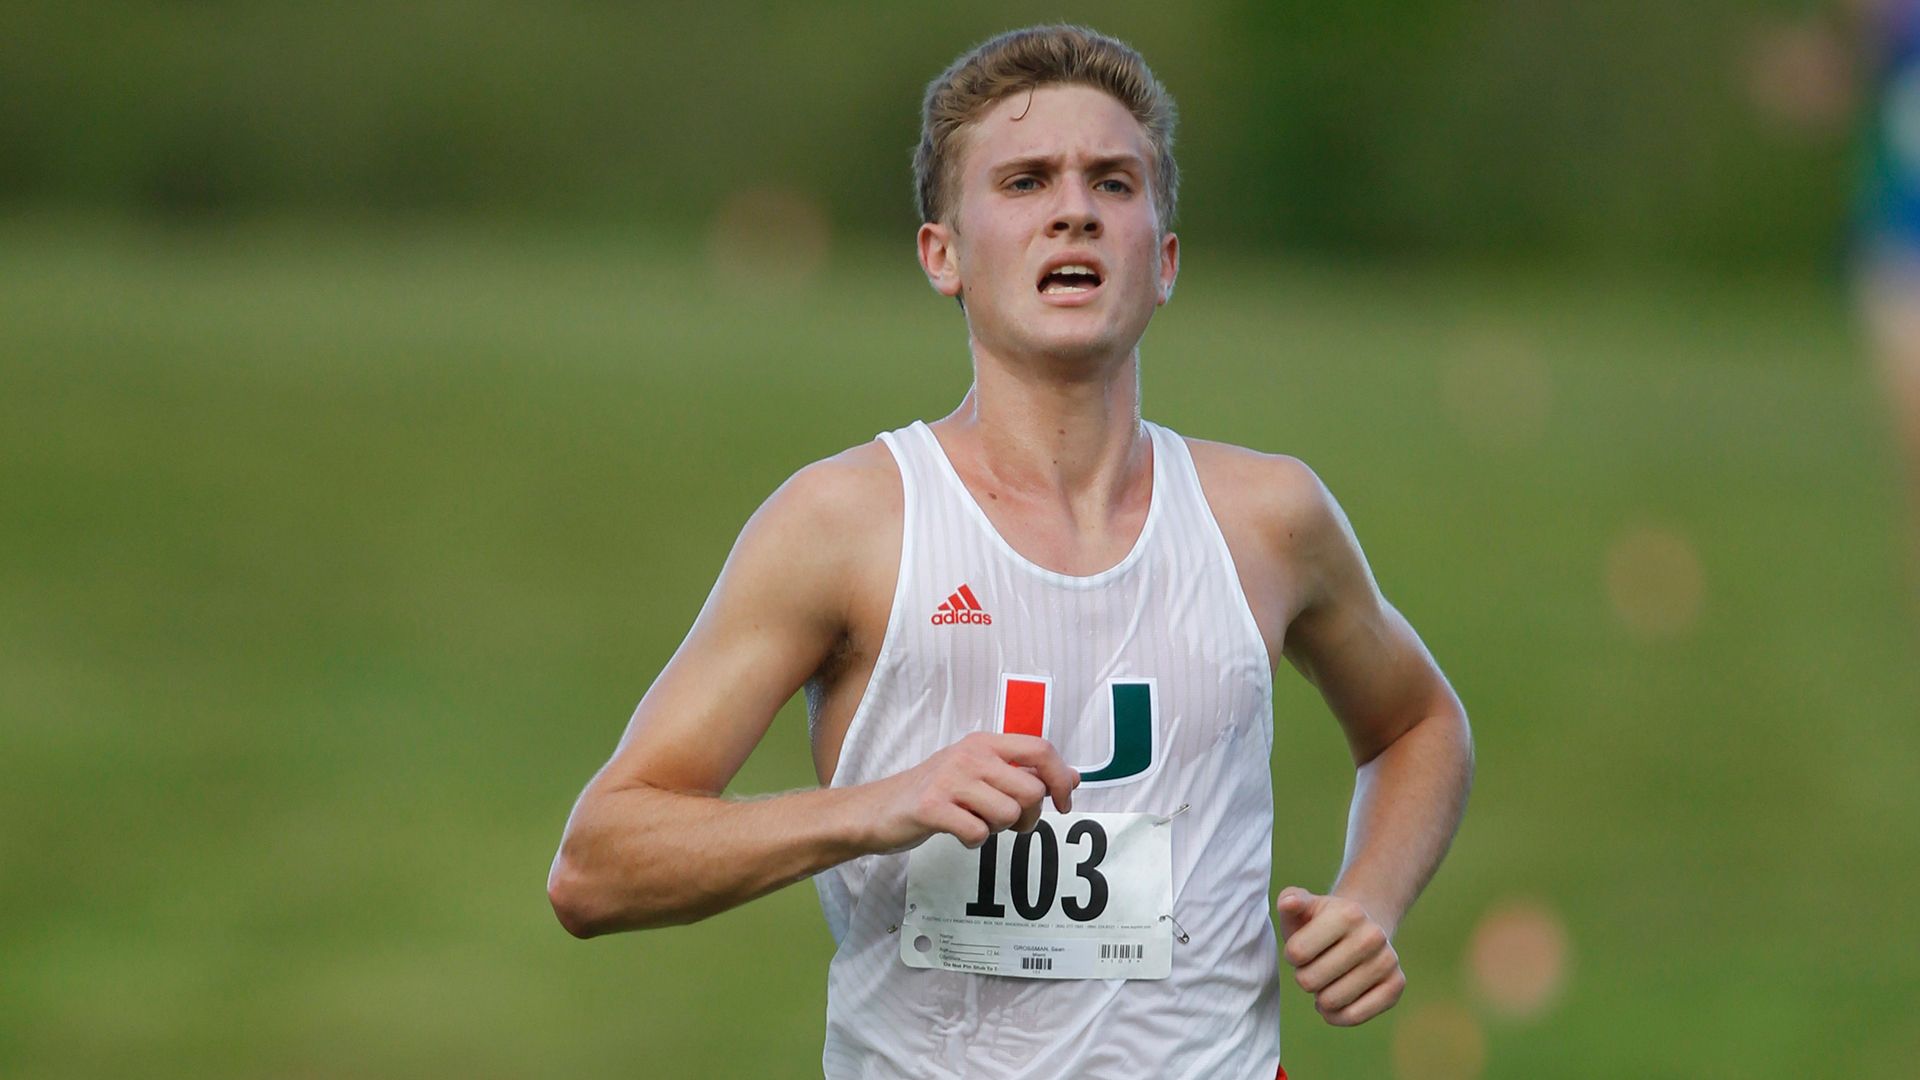 Men's Cross Country Up to No. 14 in Region